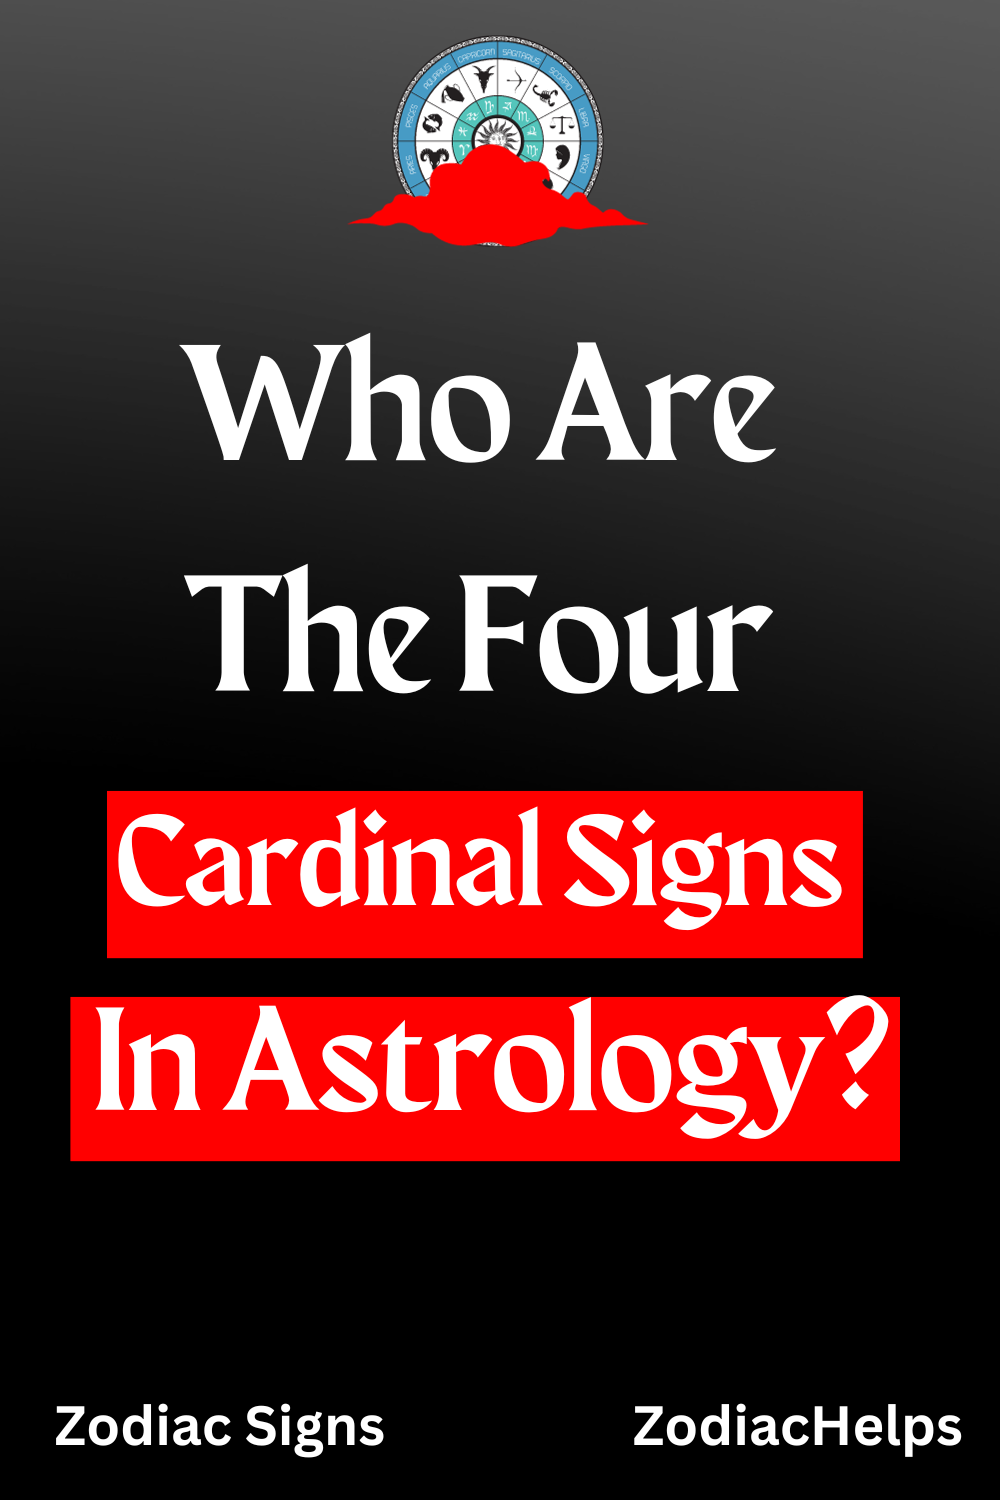 Who Are The Four Cardinal Signs In Astrology?